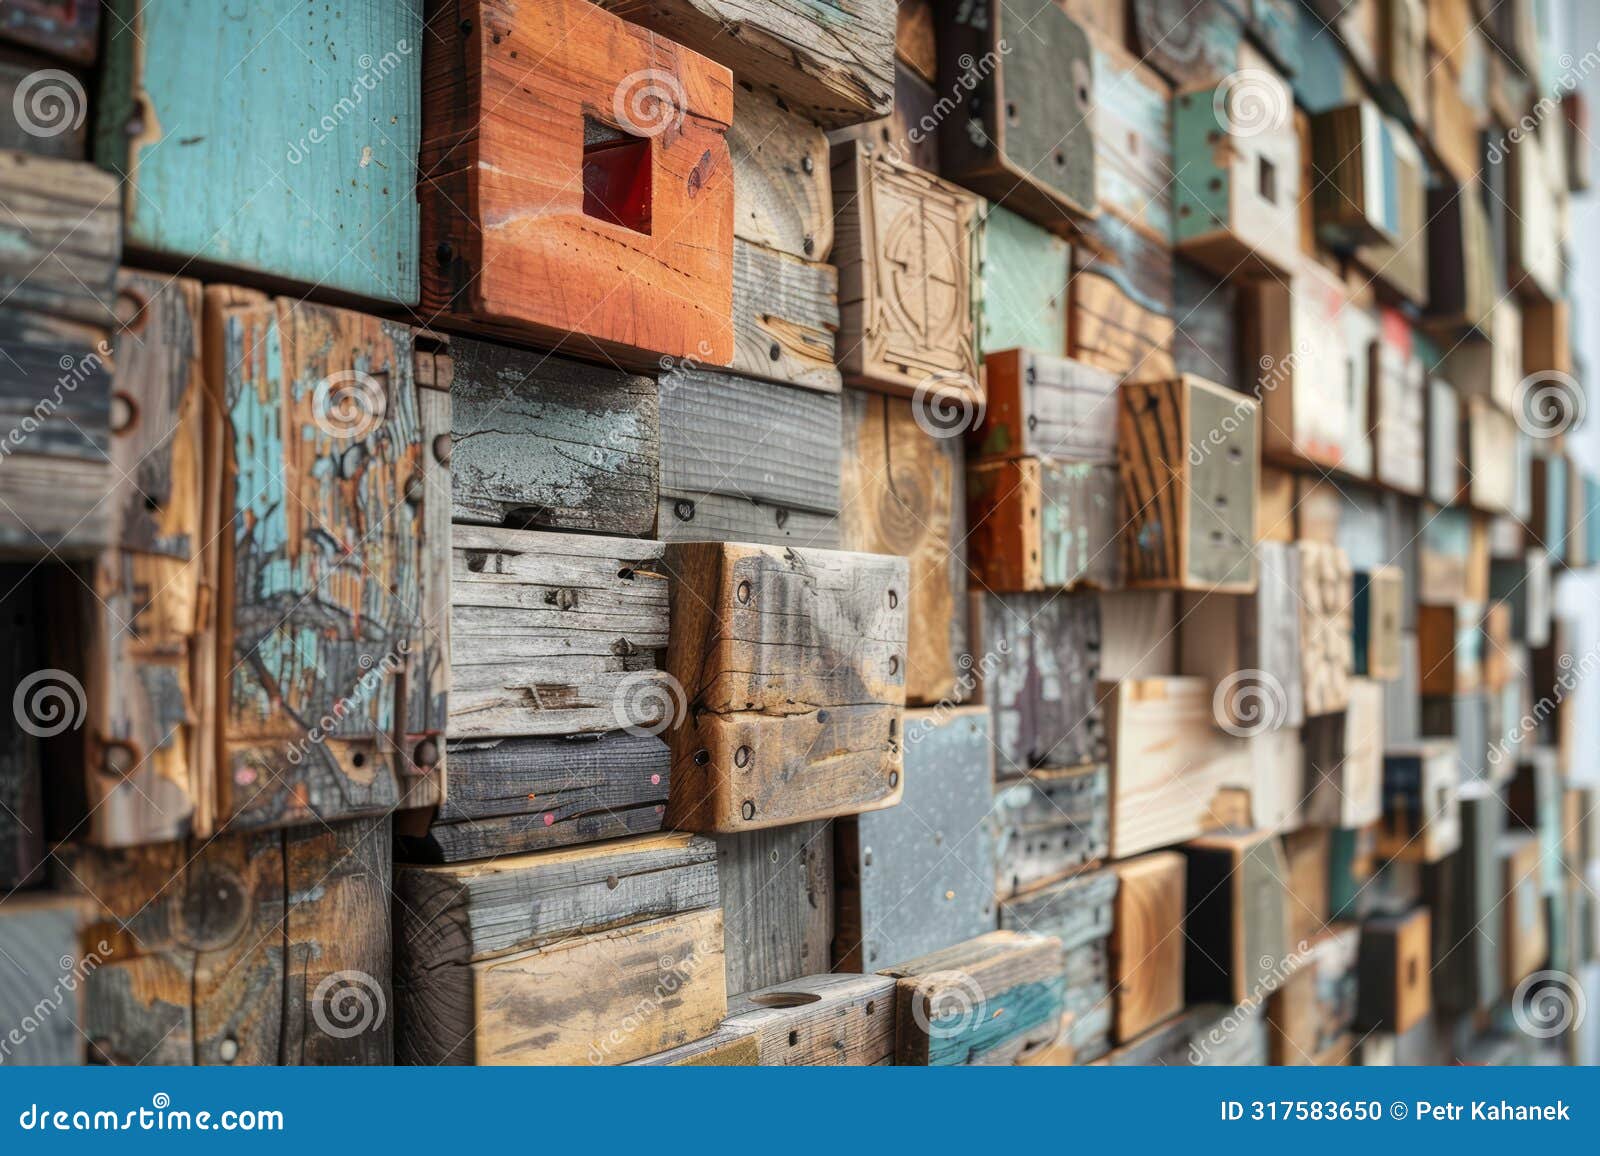 art installation created with reclaimed timber pieces, exploring environmental themes and textural contrasts. ai